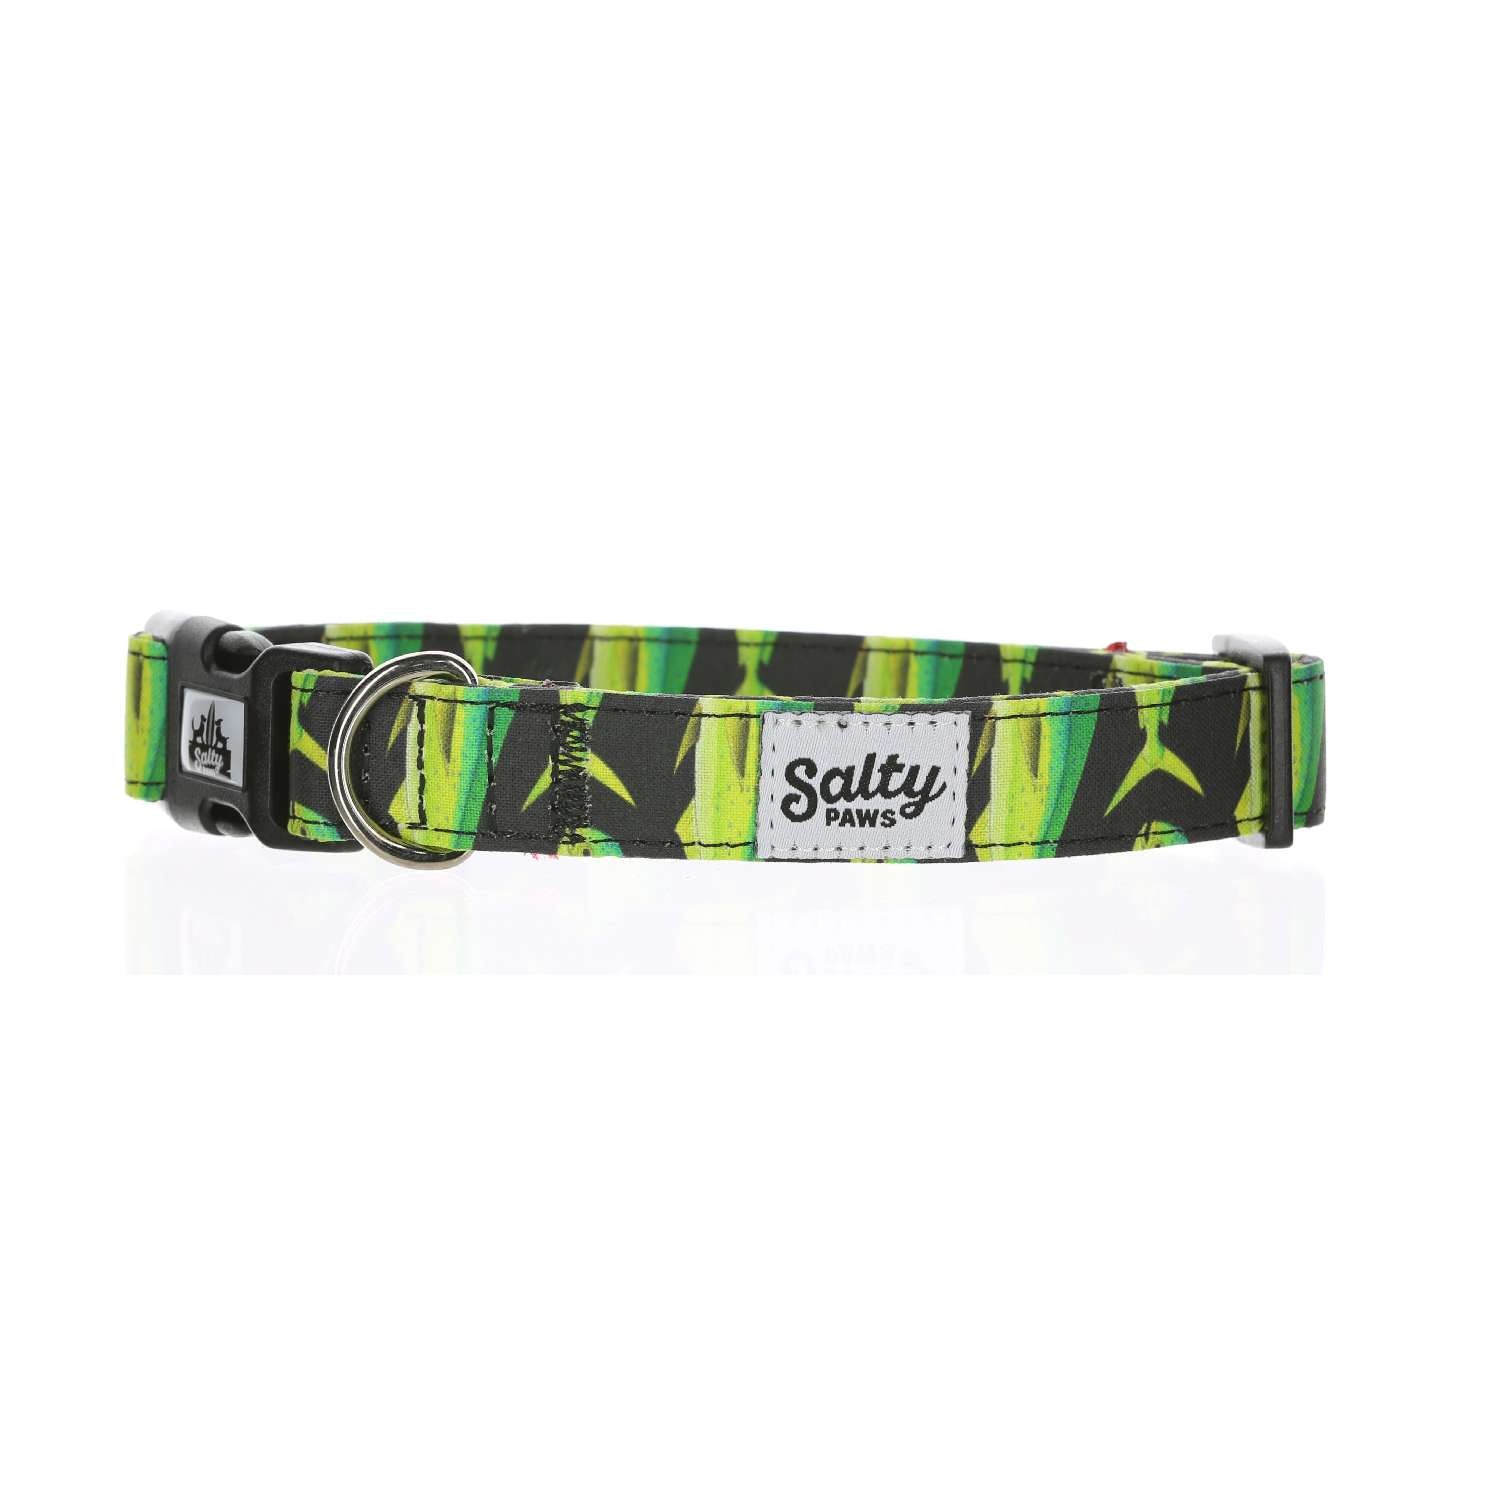 Salty Paws Surfing Dog Collar | Designs for Beach Dogs,  Floral, Fishing, Surfing, Hawaiian,  Black Mahi S